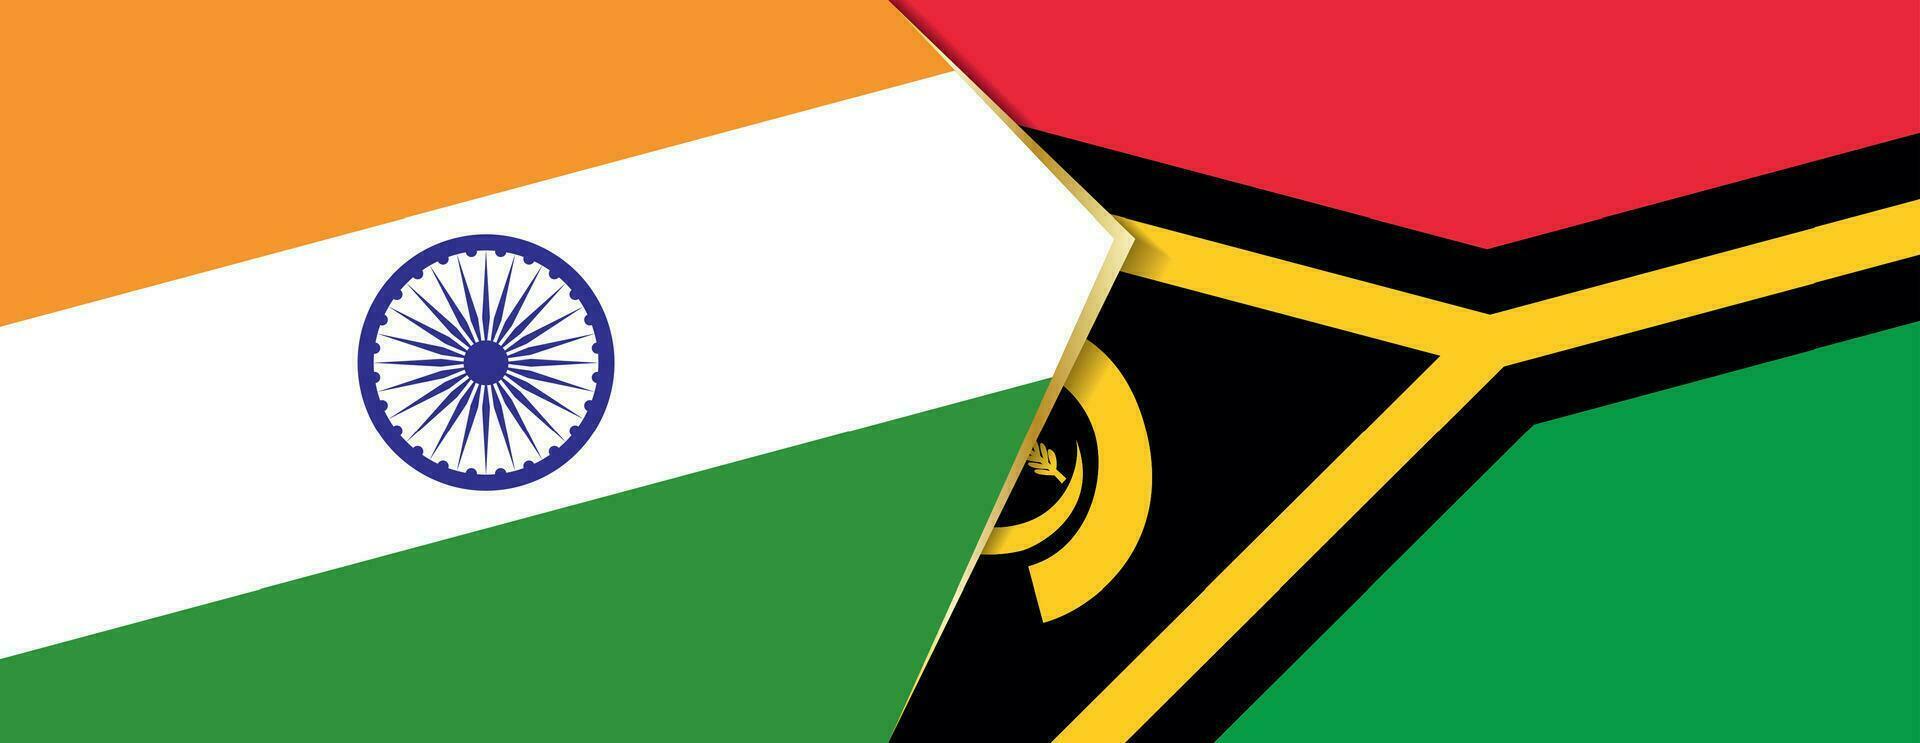 India and Vanuatu flags, two vector flags.